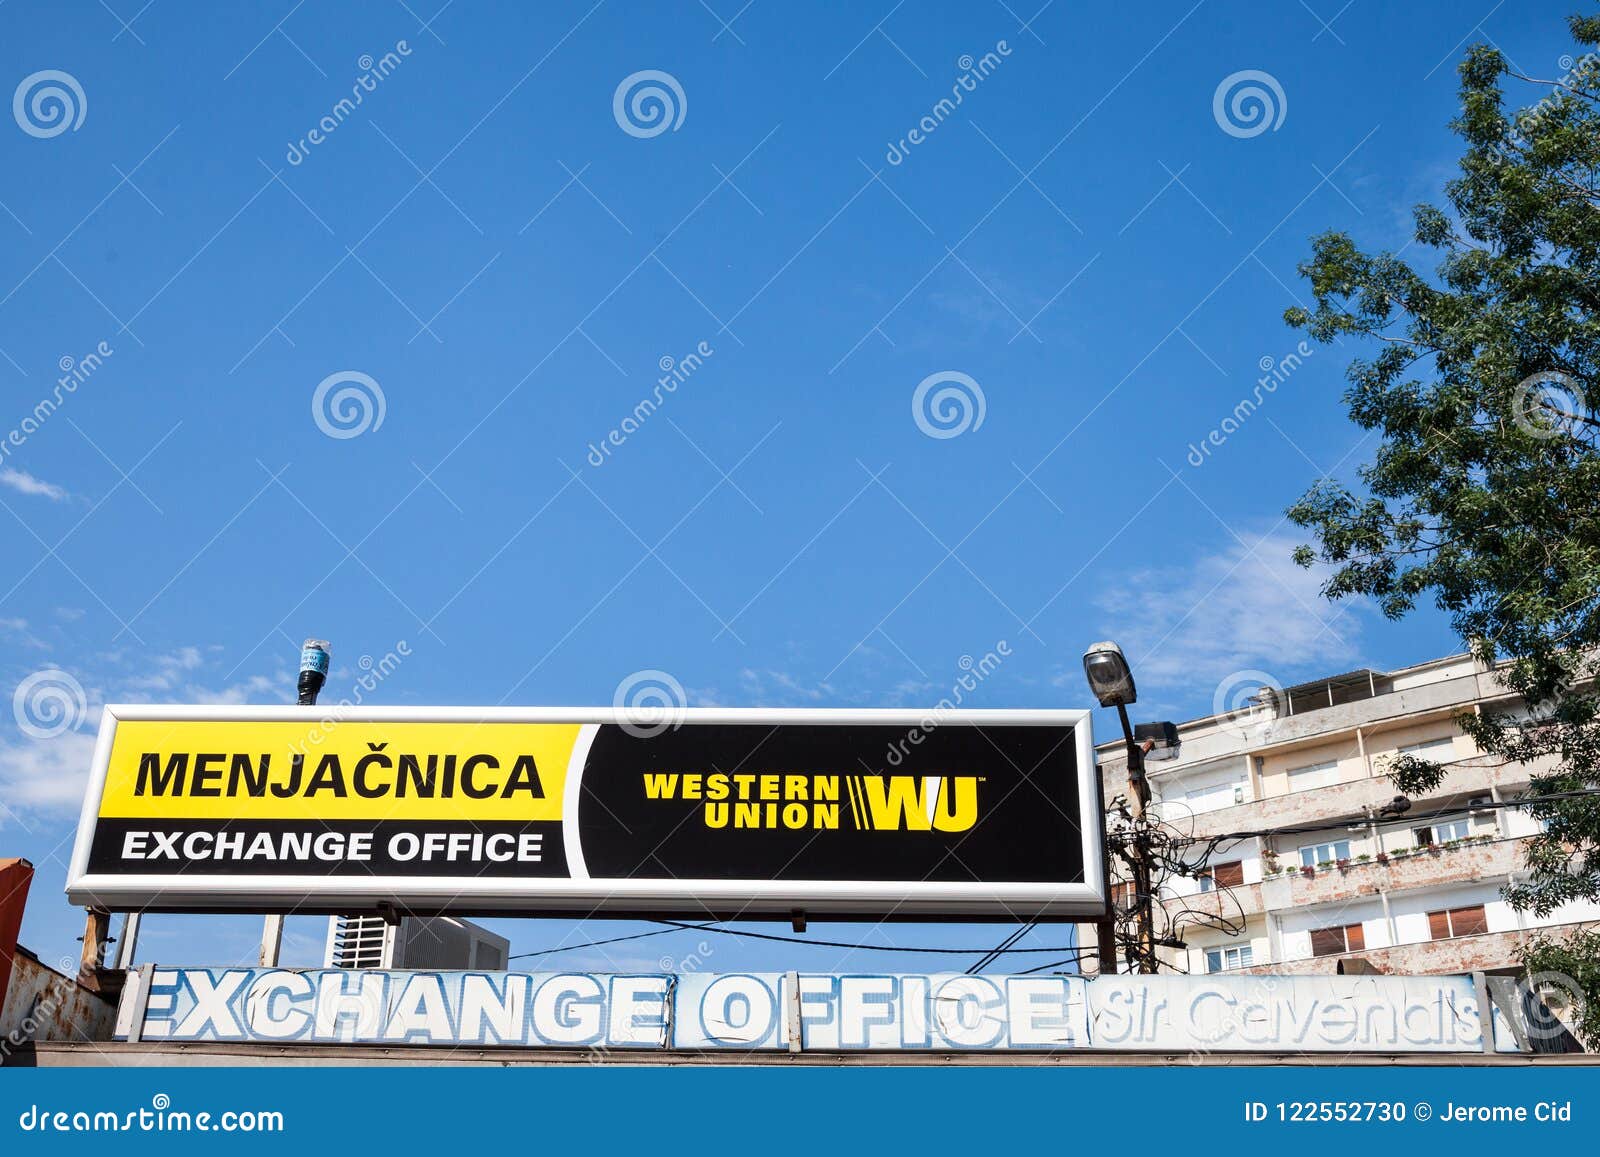 Western Union, New York City, USA Stock Photo, Picture and Royalty